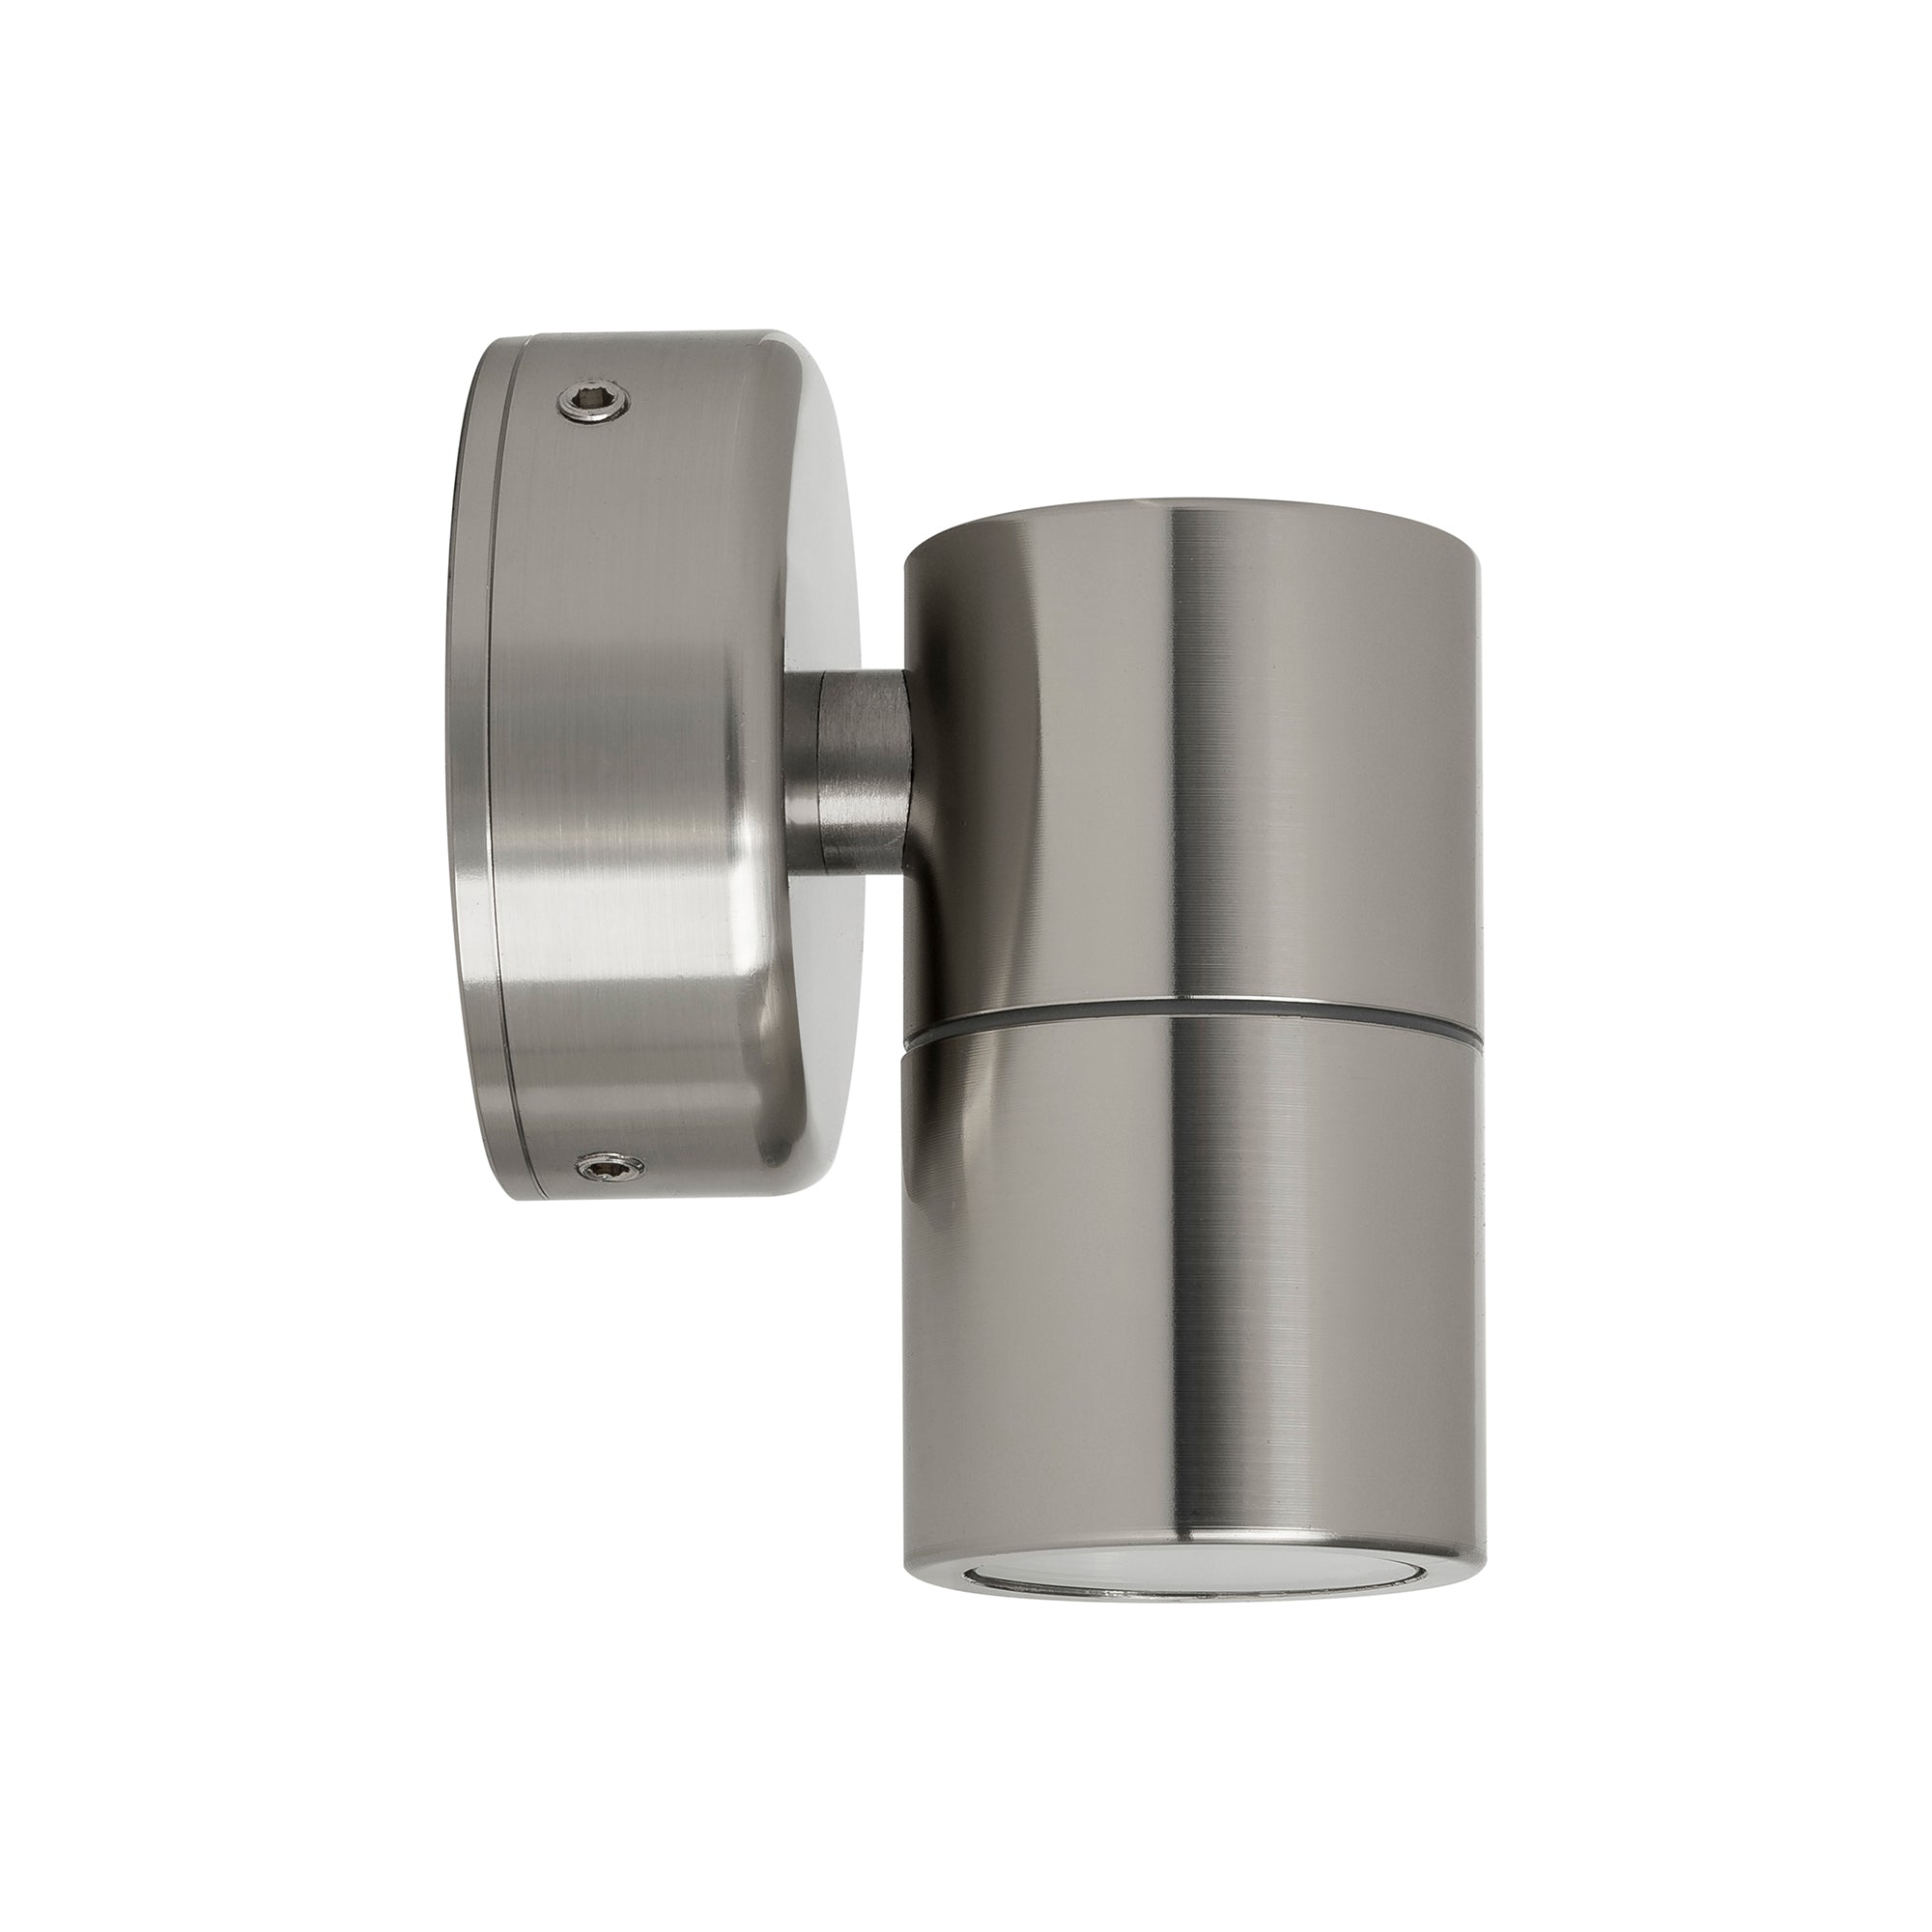 HV1107MR11NW - Mini Tivah 316 Stainless Steel Fixed Down Wall Pillar Lights